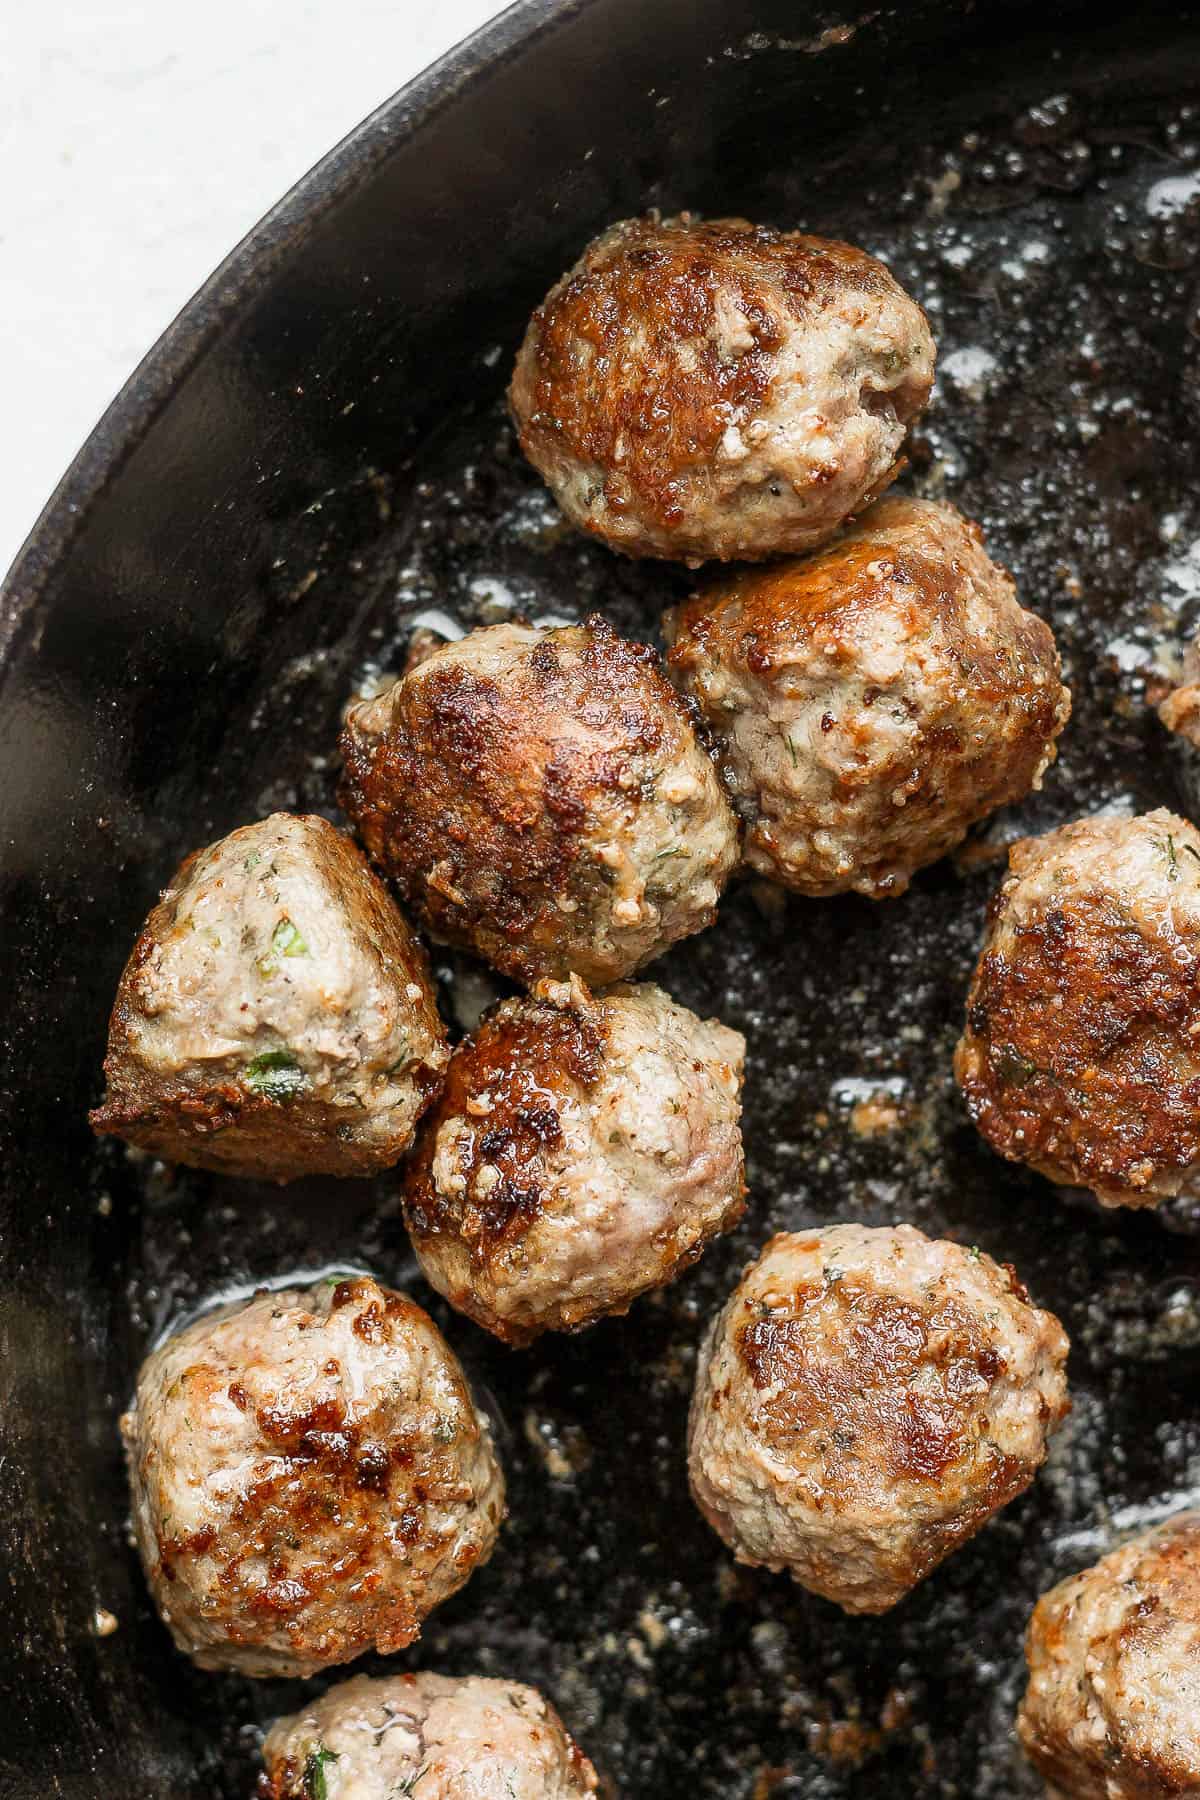 Lamb meatballs fried in a cast iron pan.